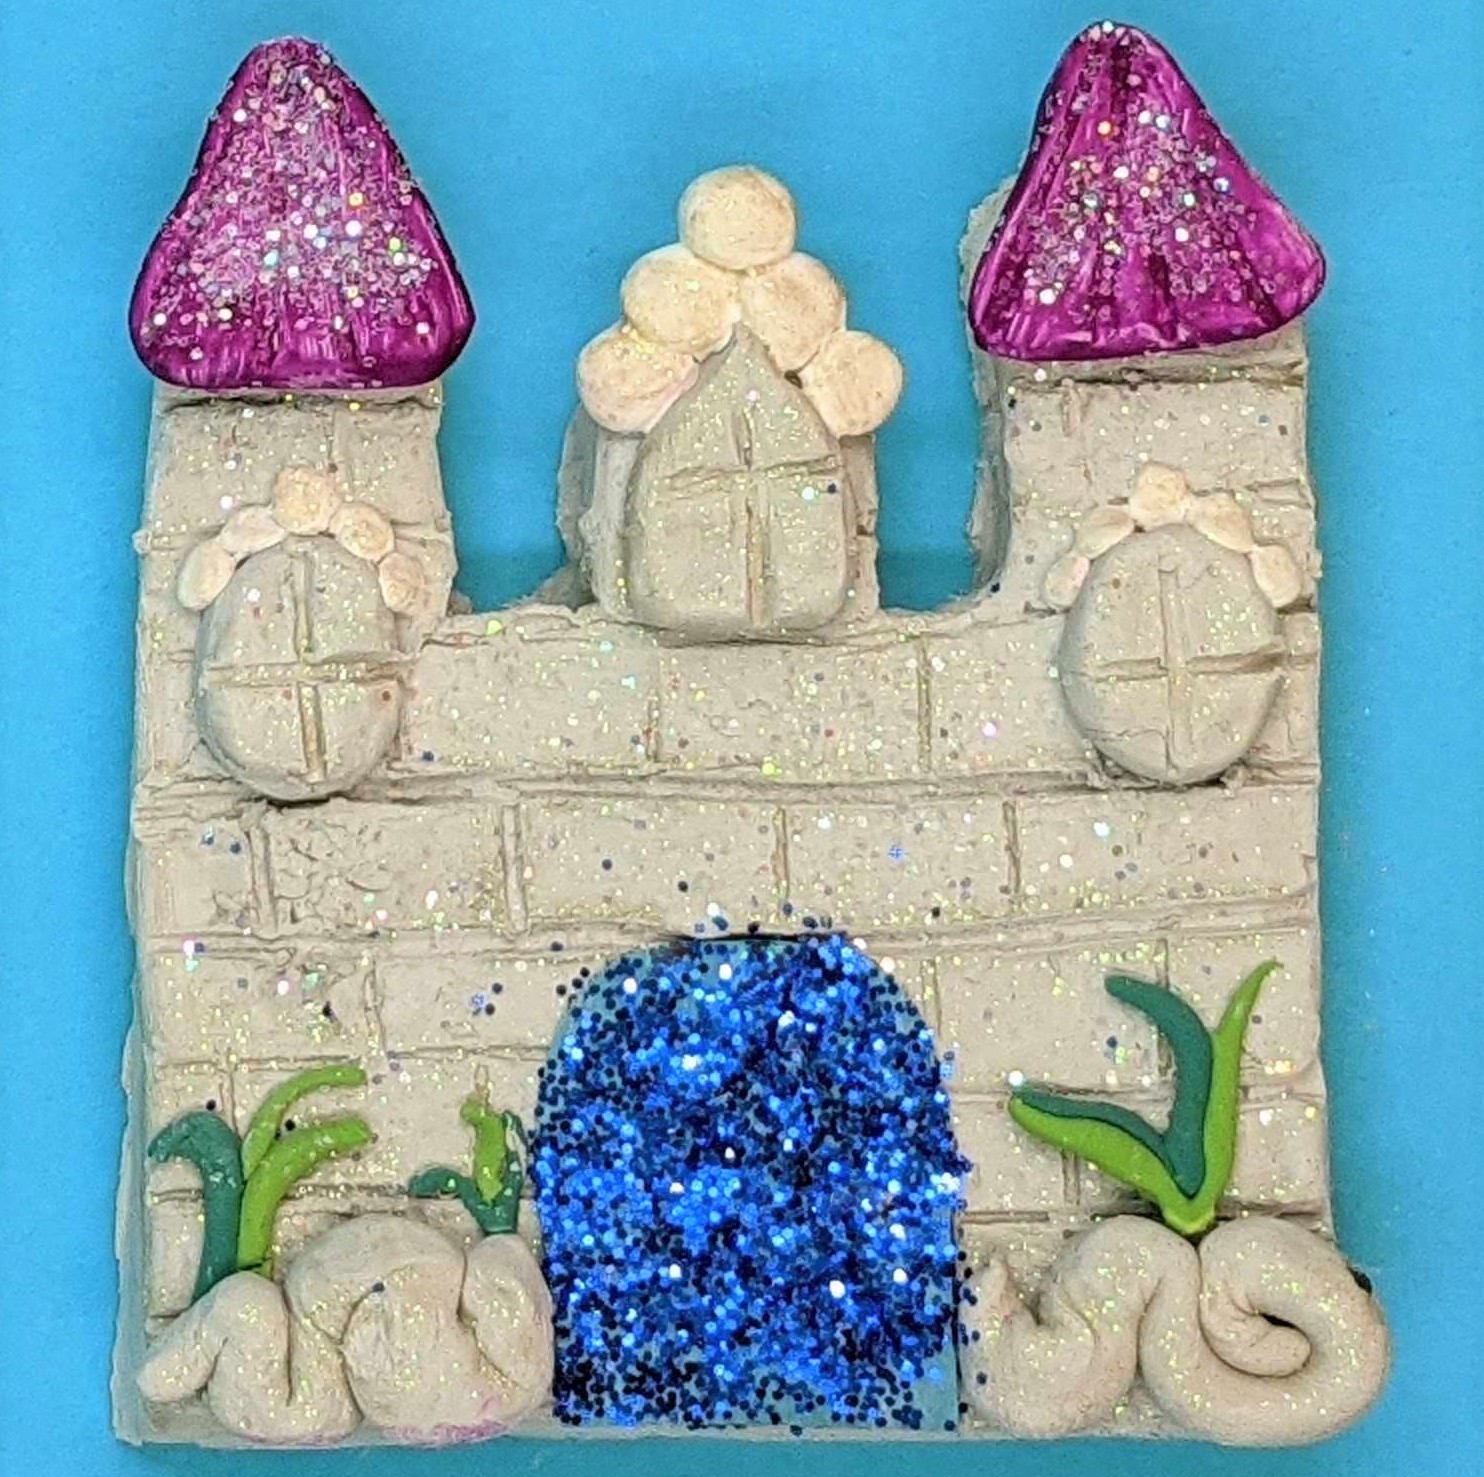 Kidcreate Studio - Chicago Lakeview, Sparkly Castle Art Project